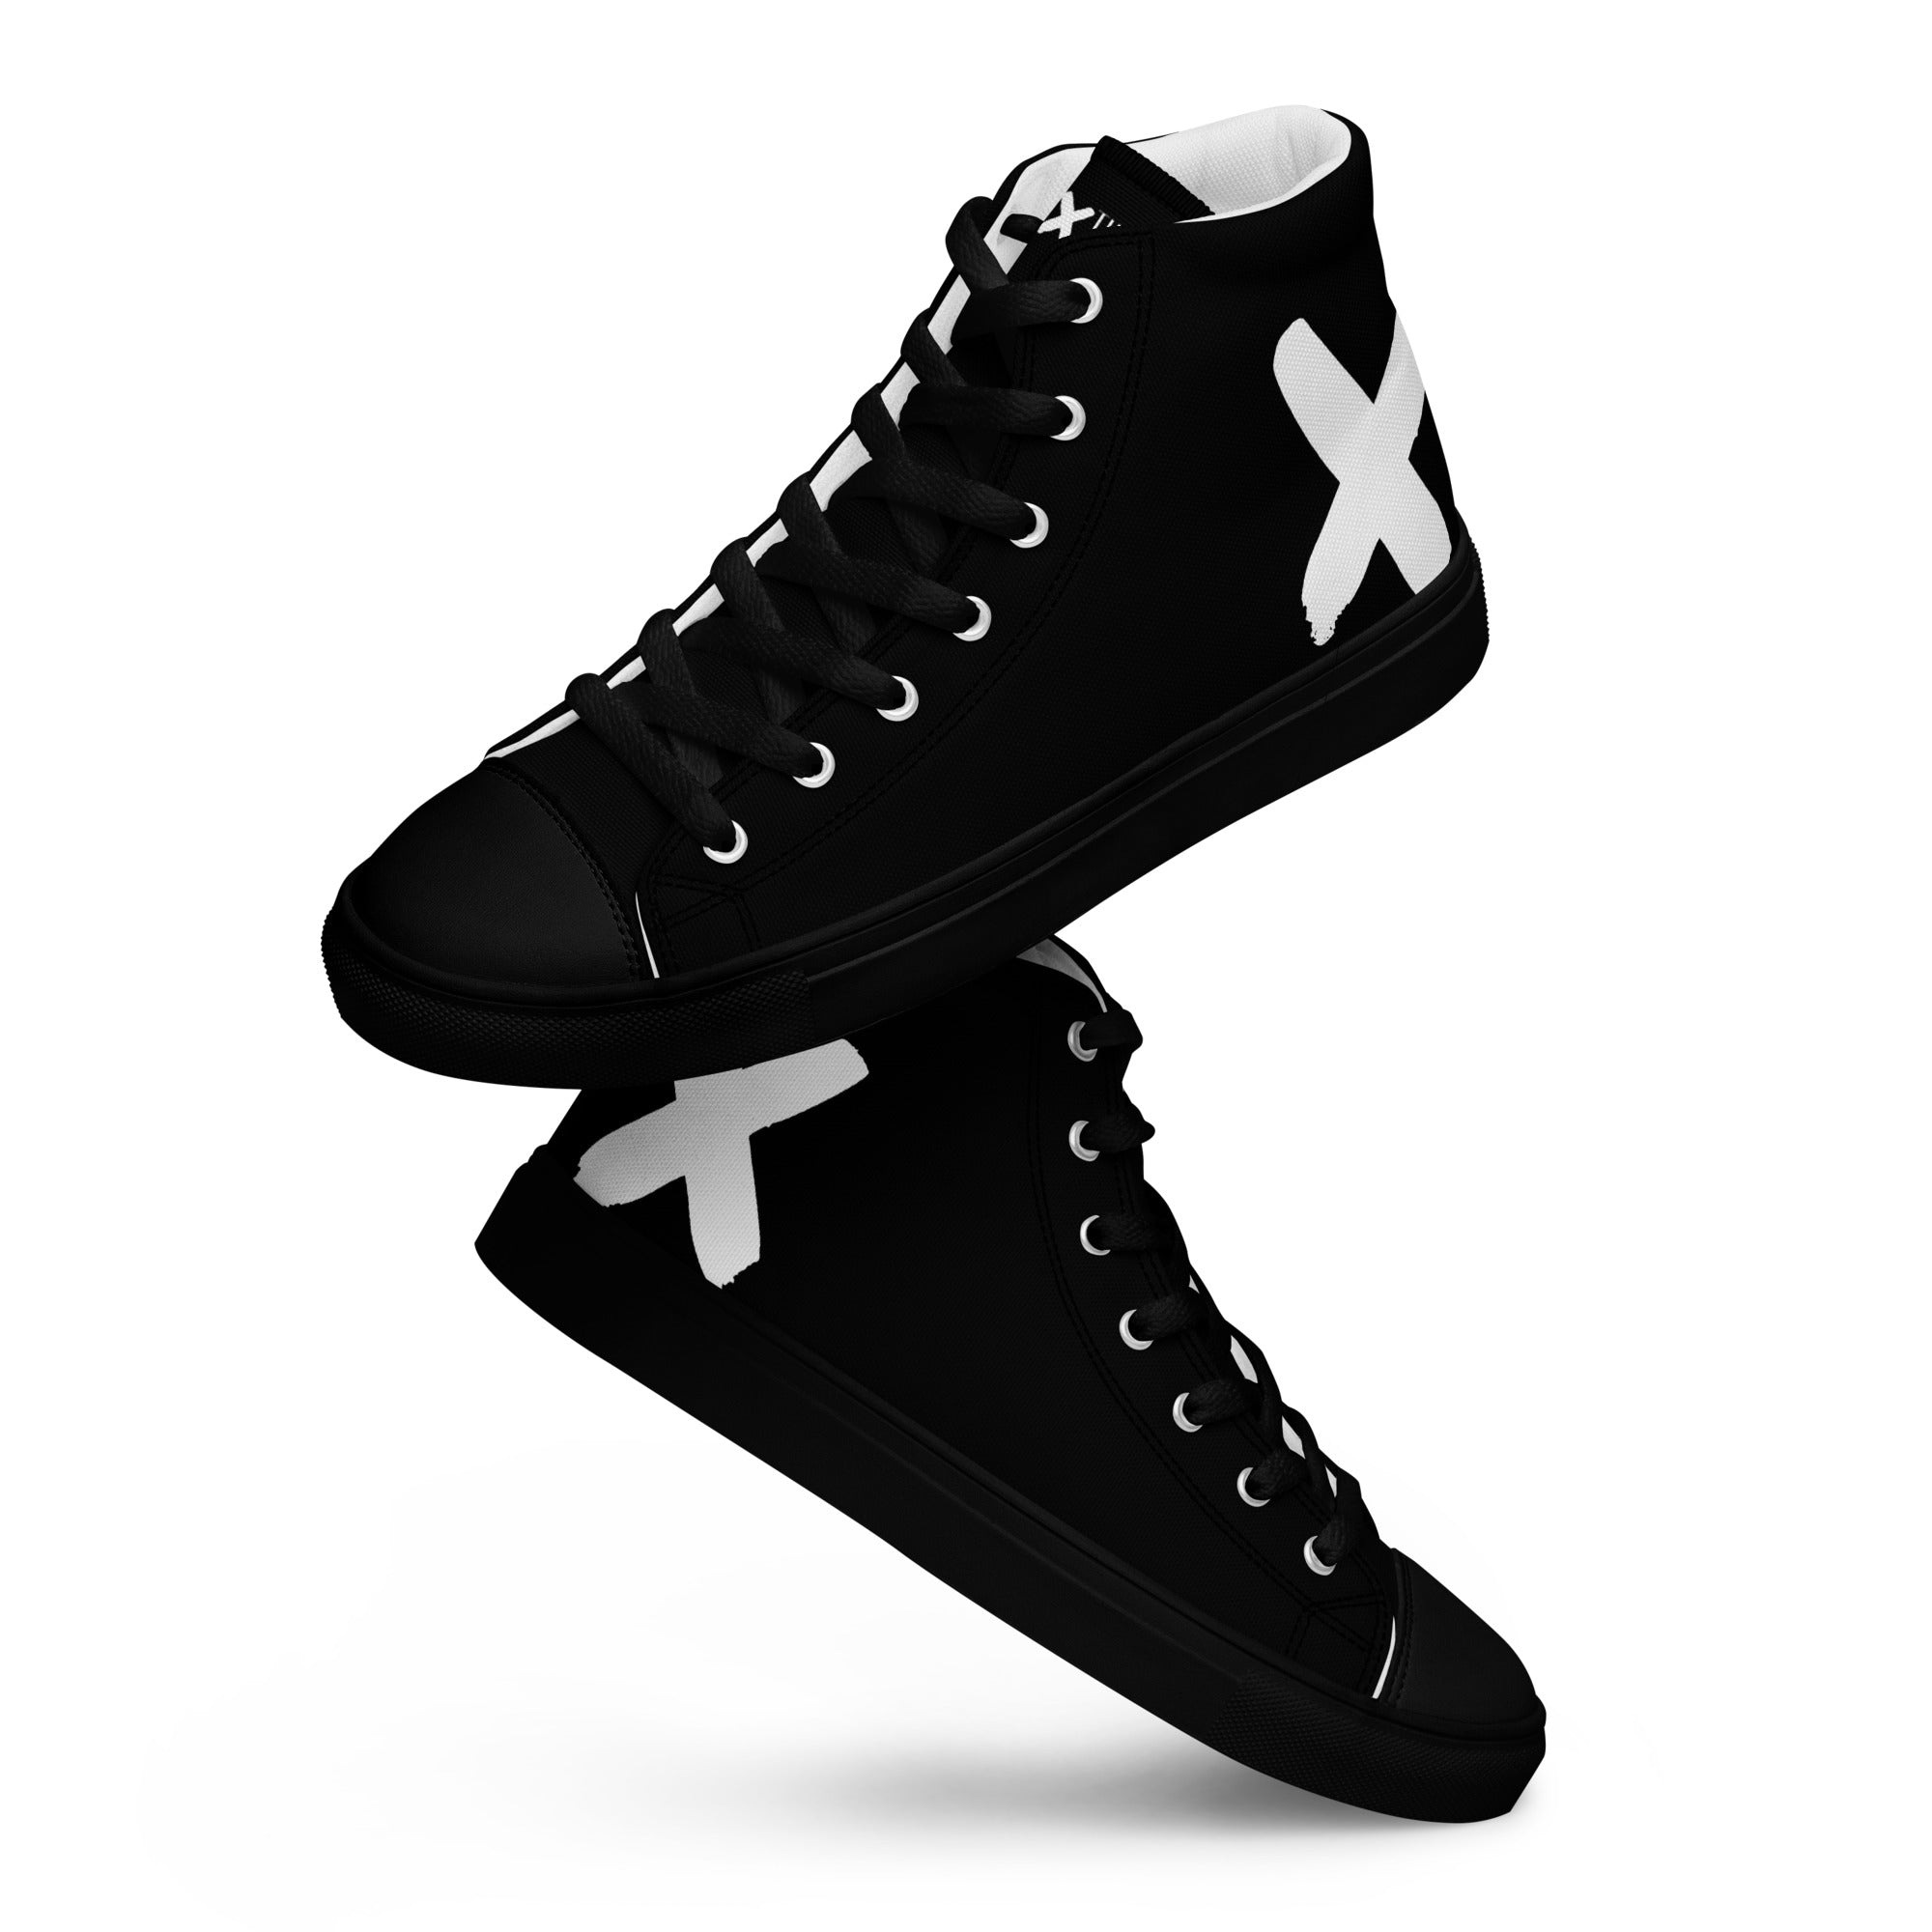 FASHION THERAPY women's high-top canvas sneakers